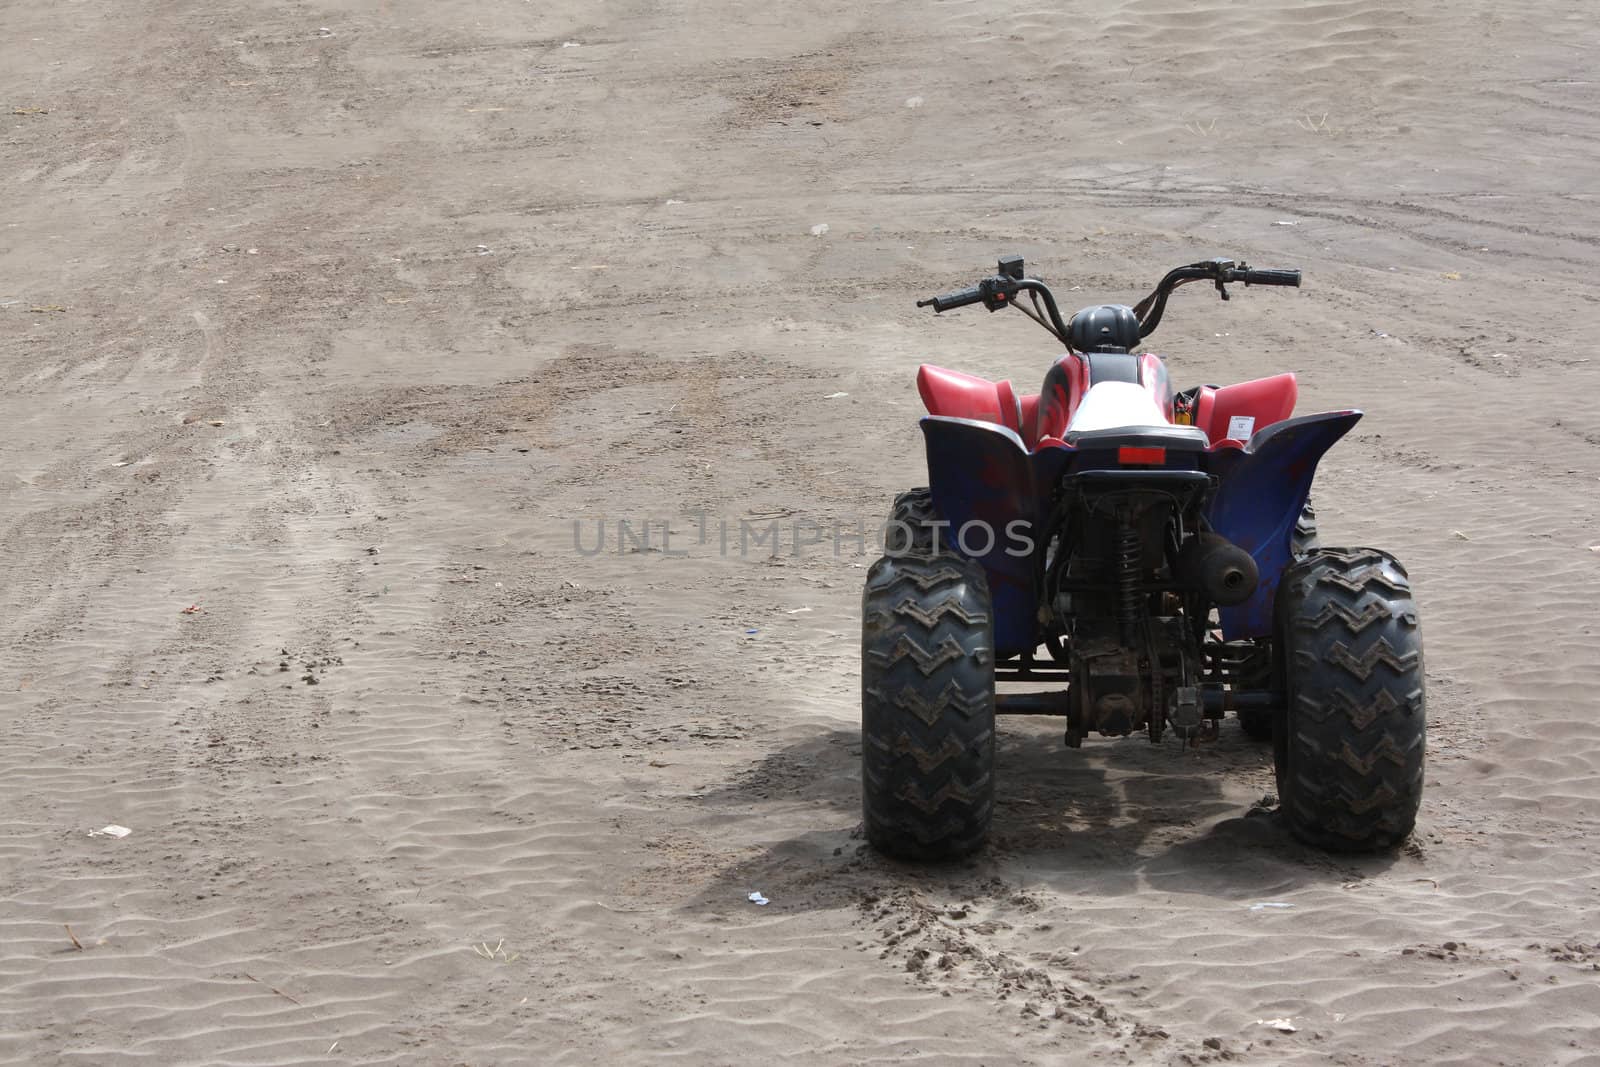 A beach buggy without a rider, on the beach sands.